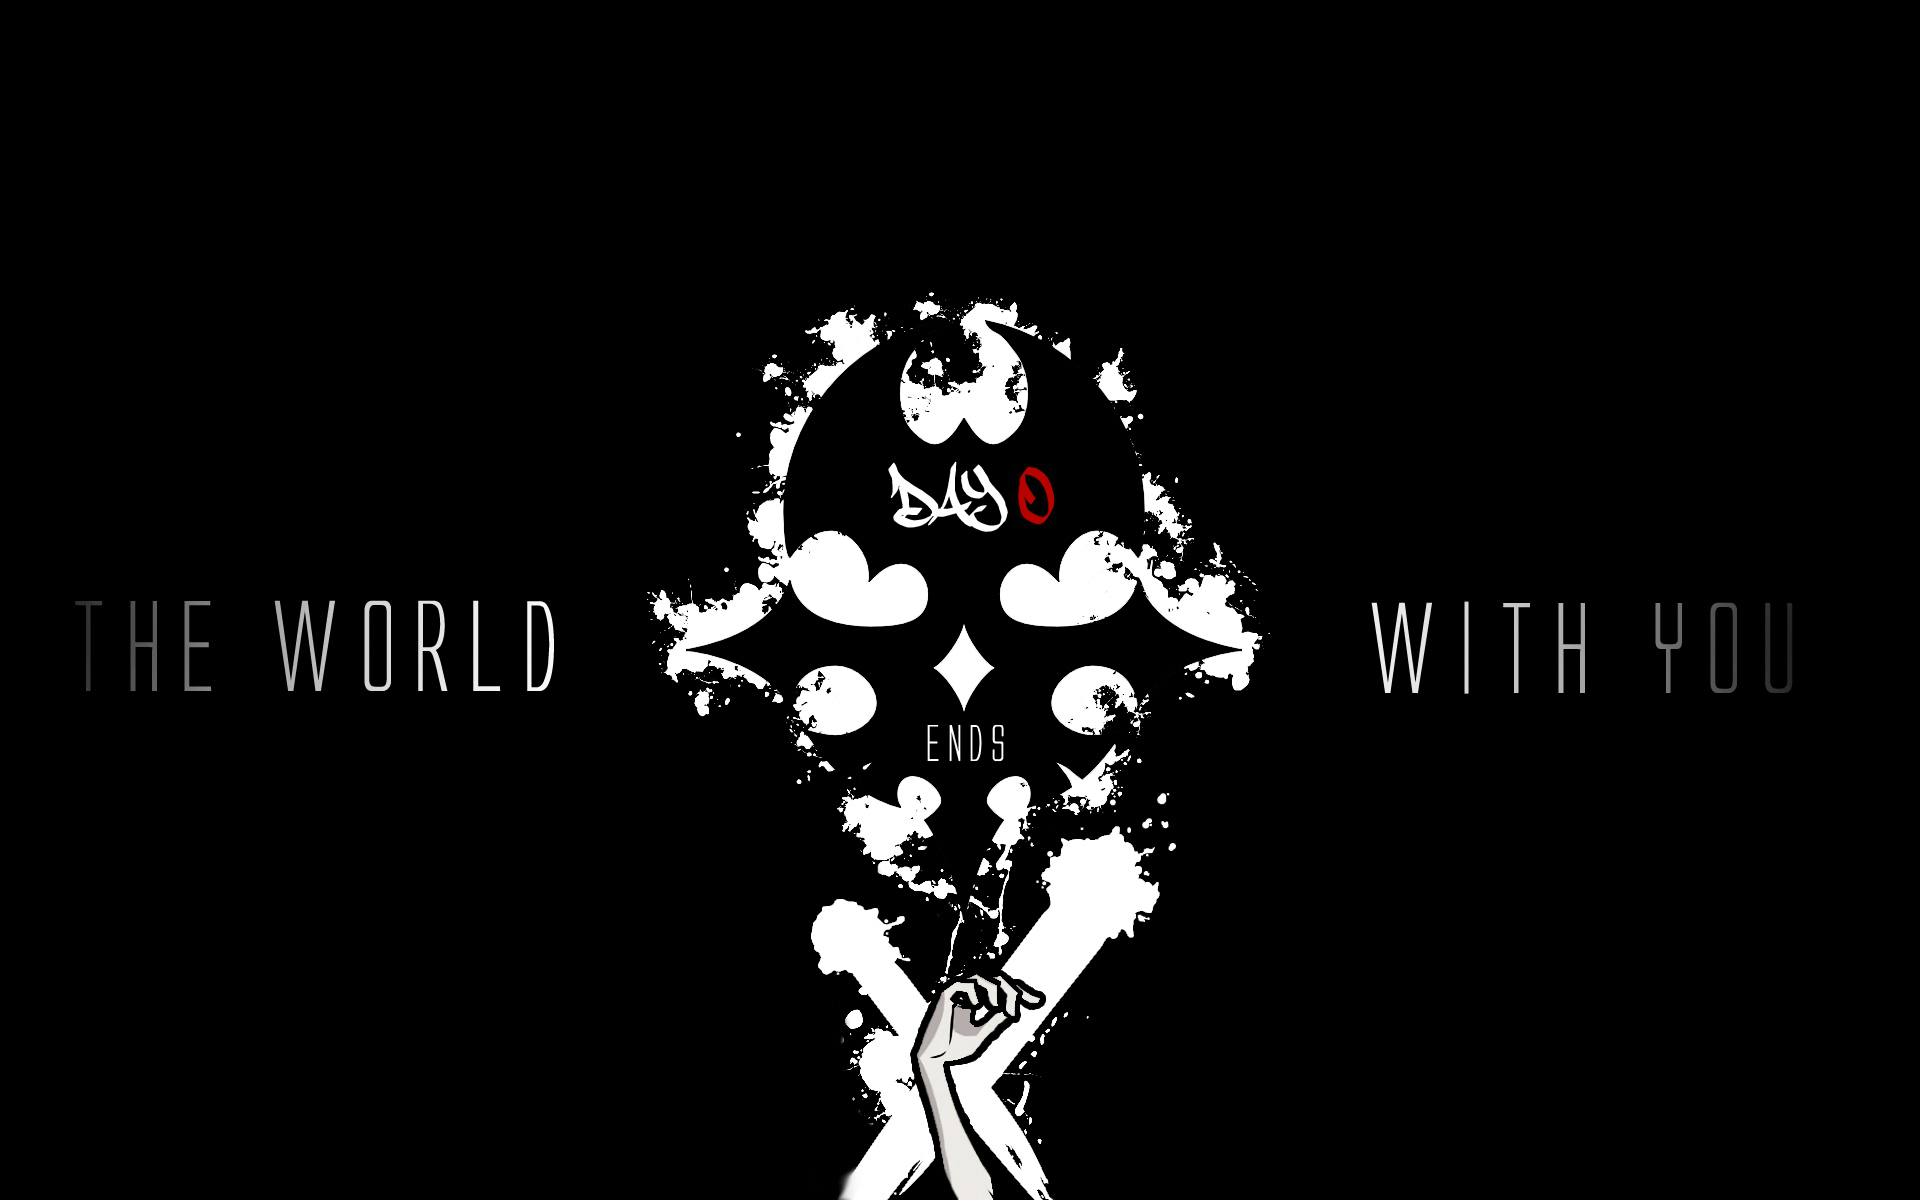 The World Ends With You HD Wallpaper